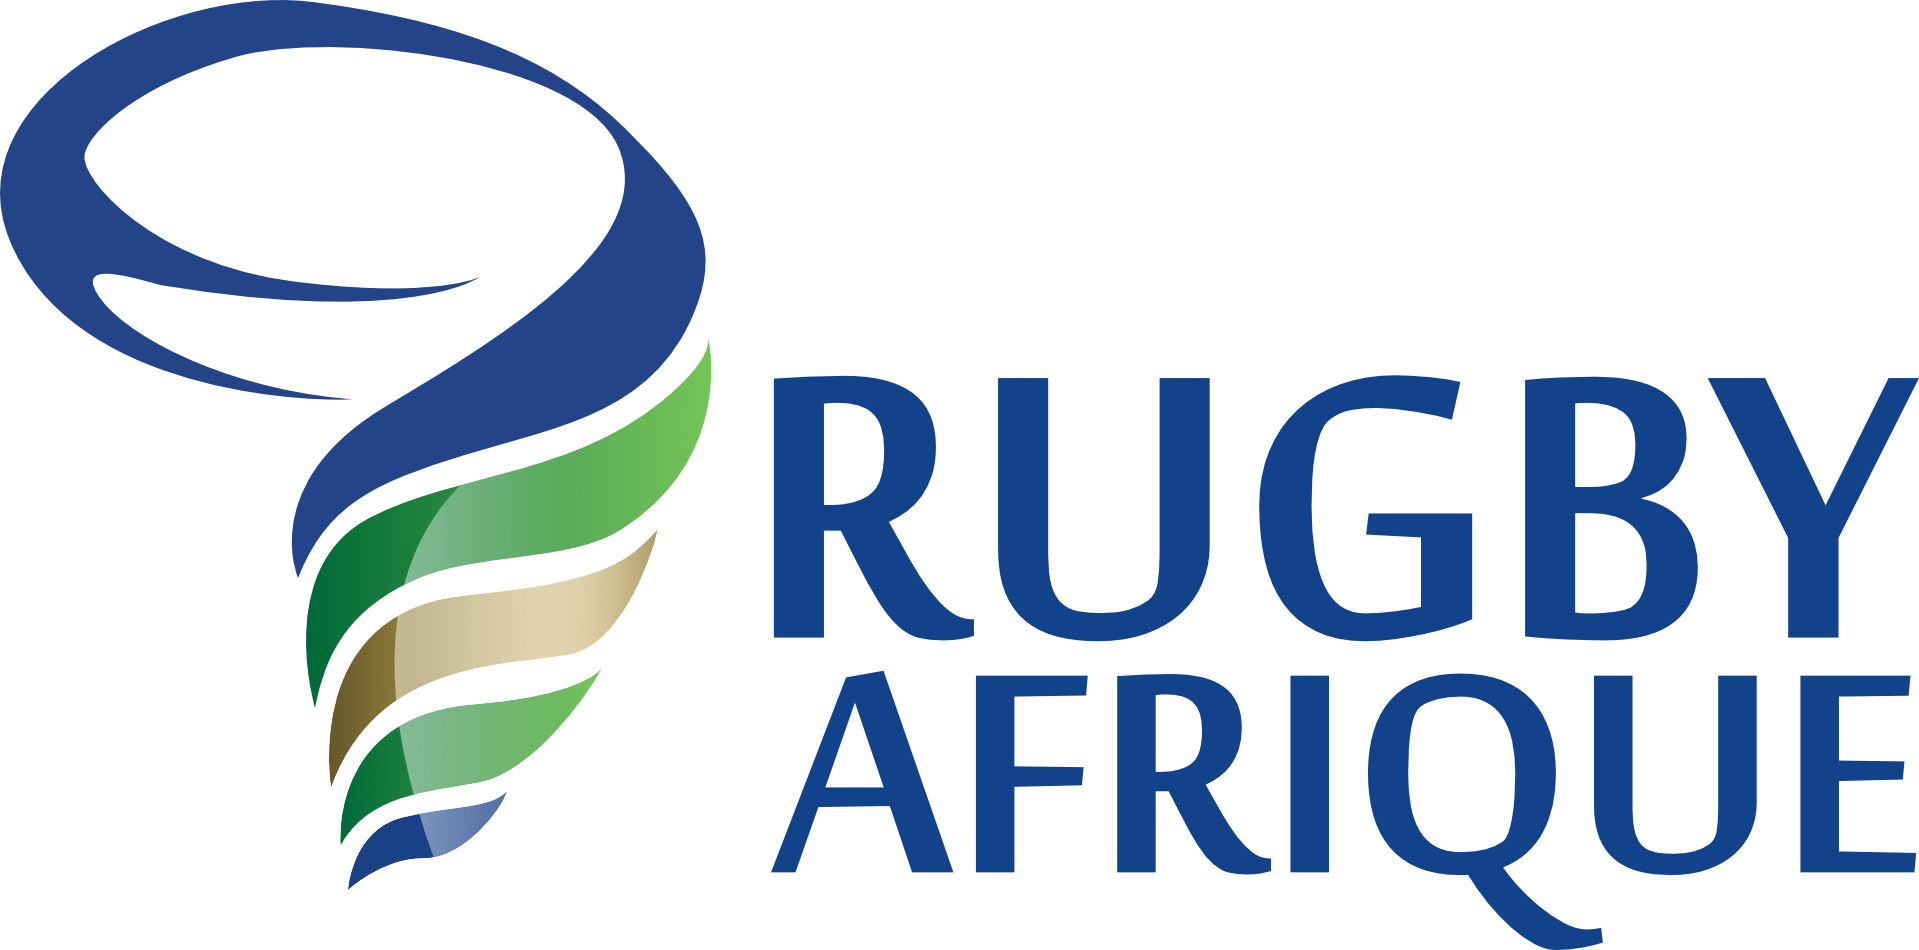 Volunteer Program: Rugby Africa Seeks Skilled Volunteers to Join the Office of the President and Contribute to Development of Rugby Across the Continent